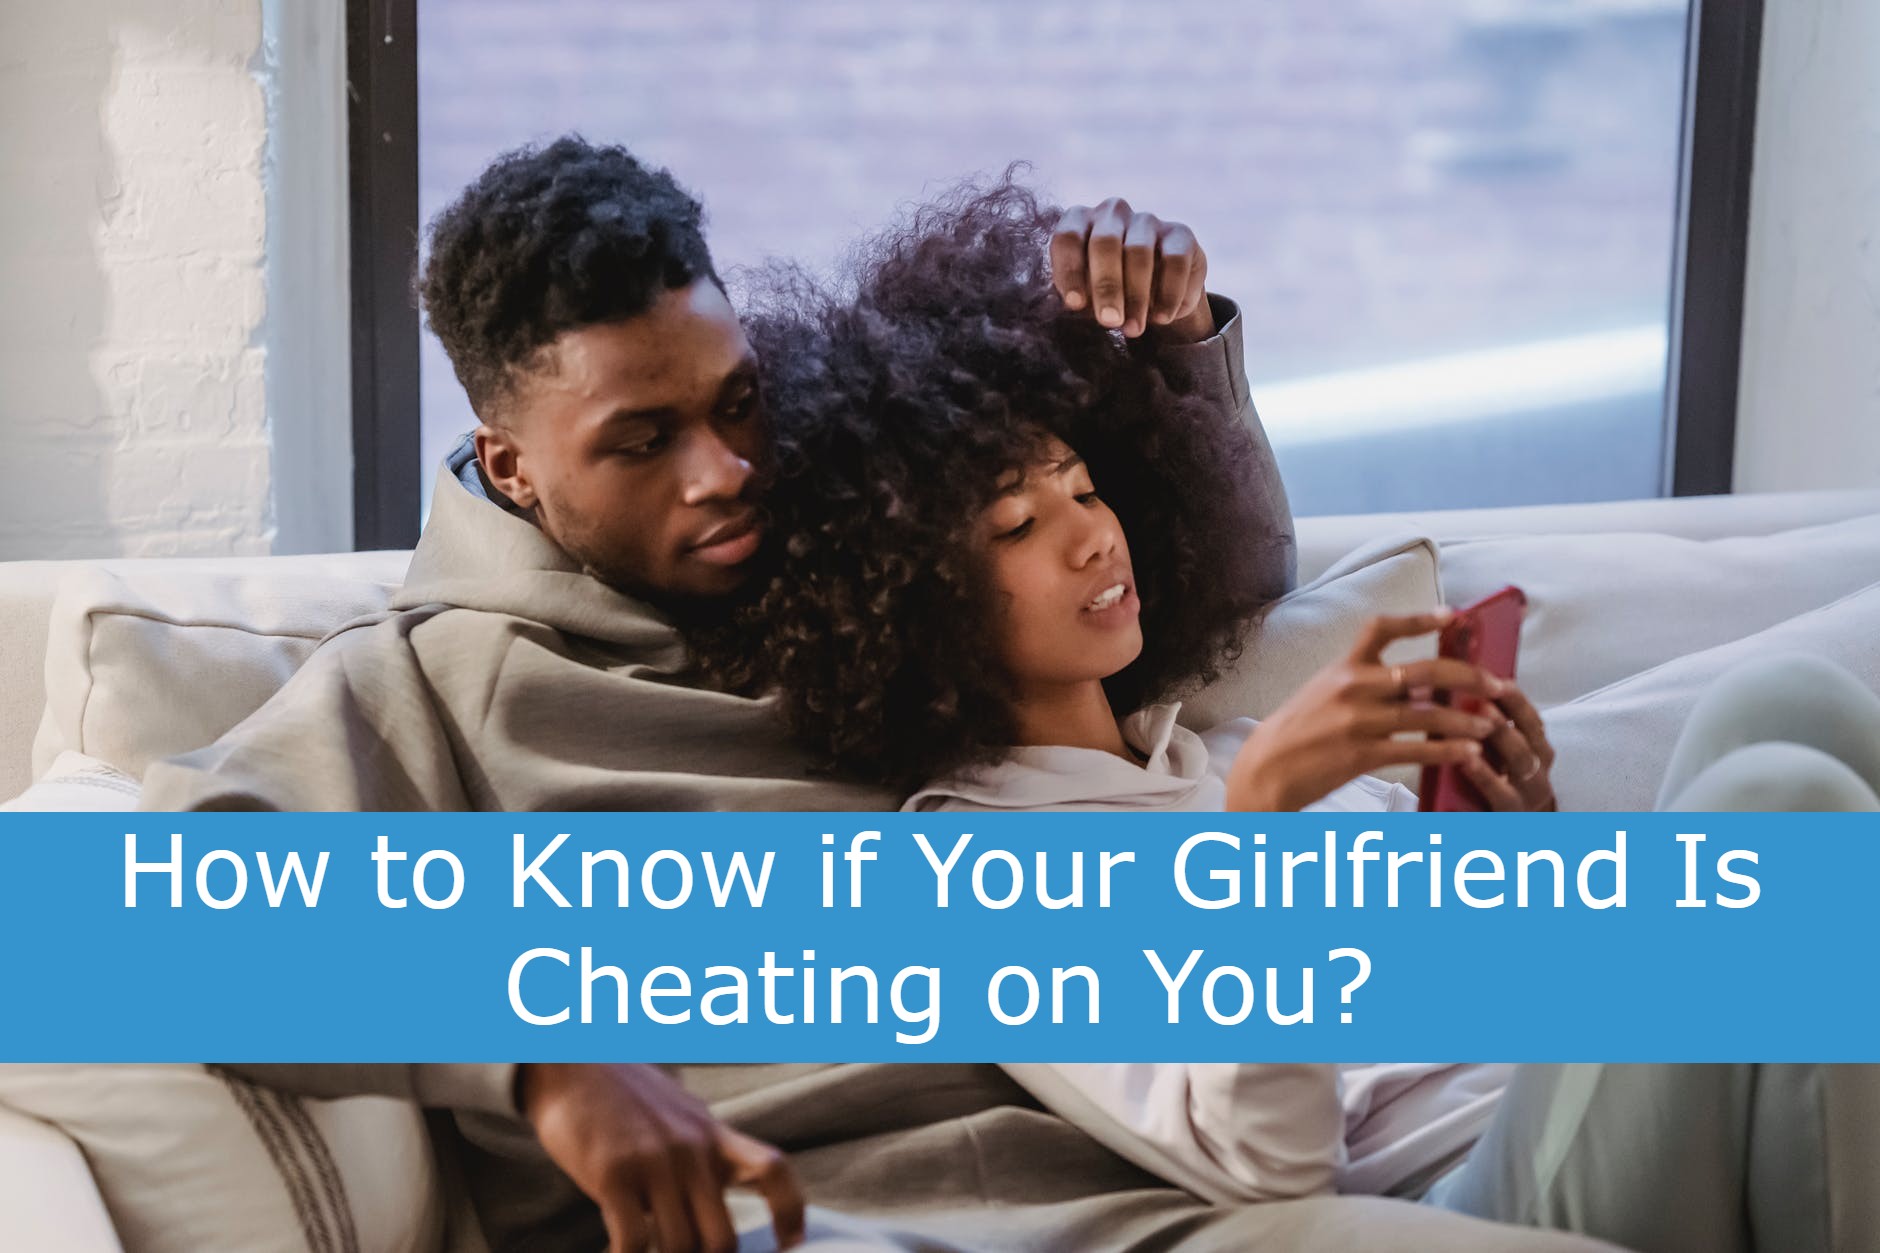 A couple is looking at the smartphone of a cheating girlfriend